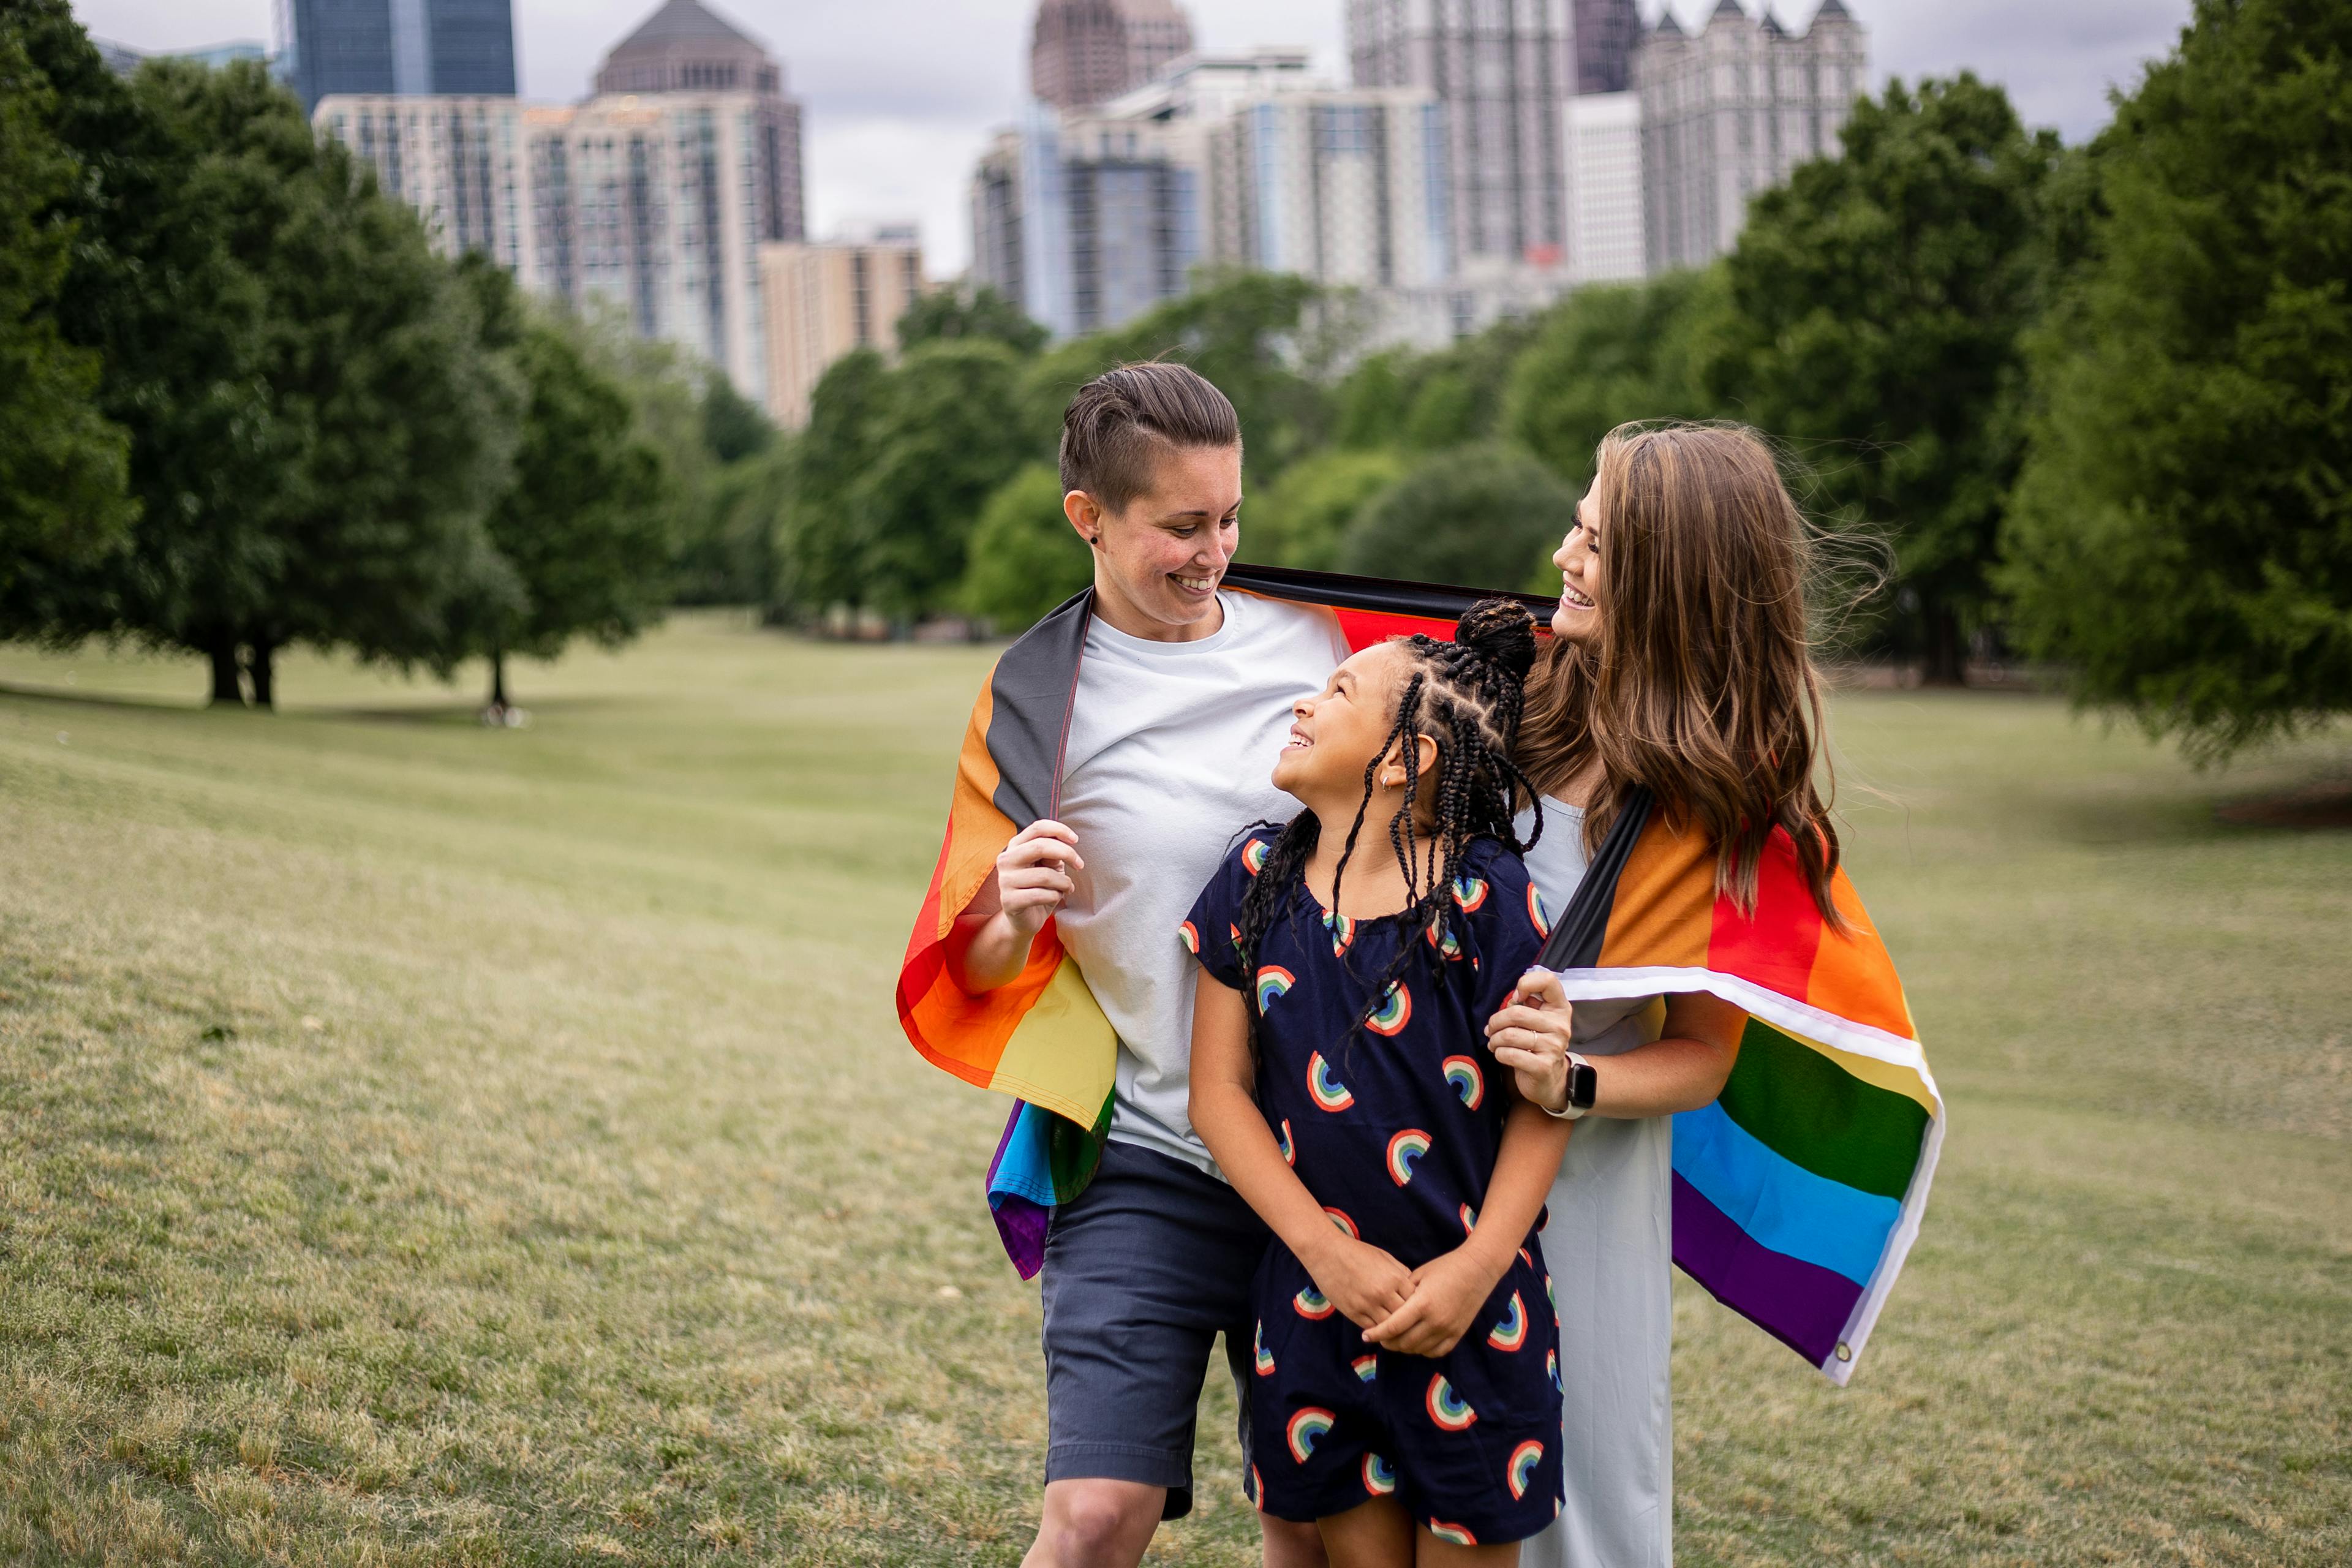 Three people smiling and holding a rainbow flag in a park with city buildings in the background.